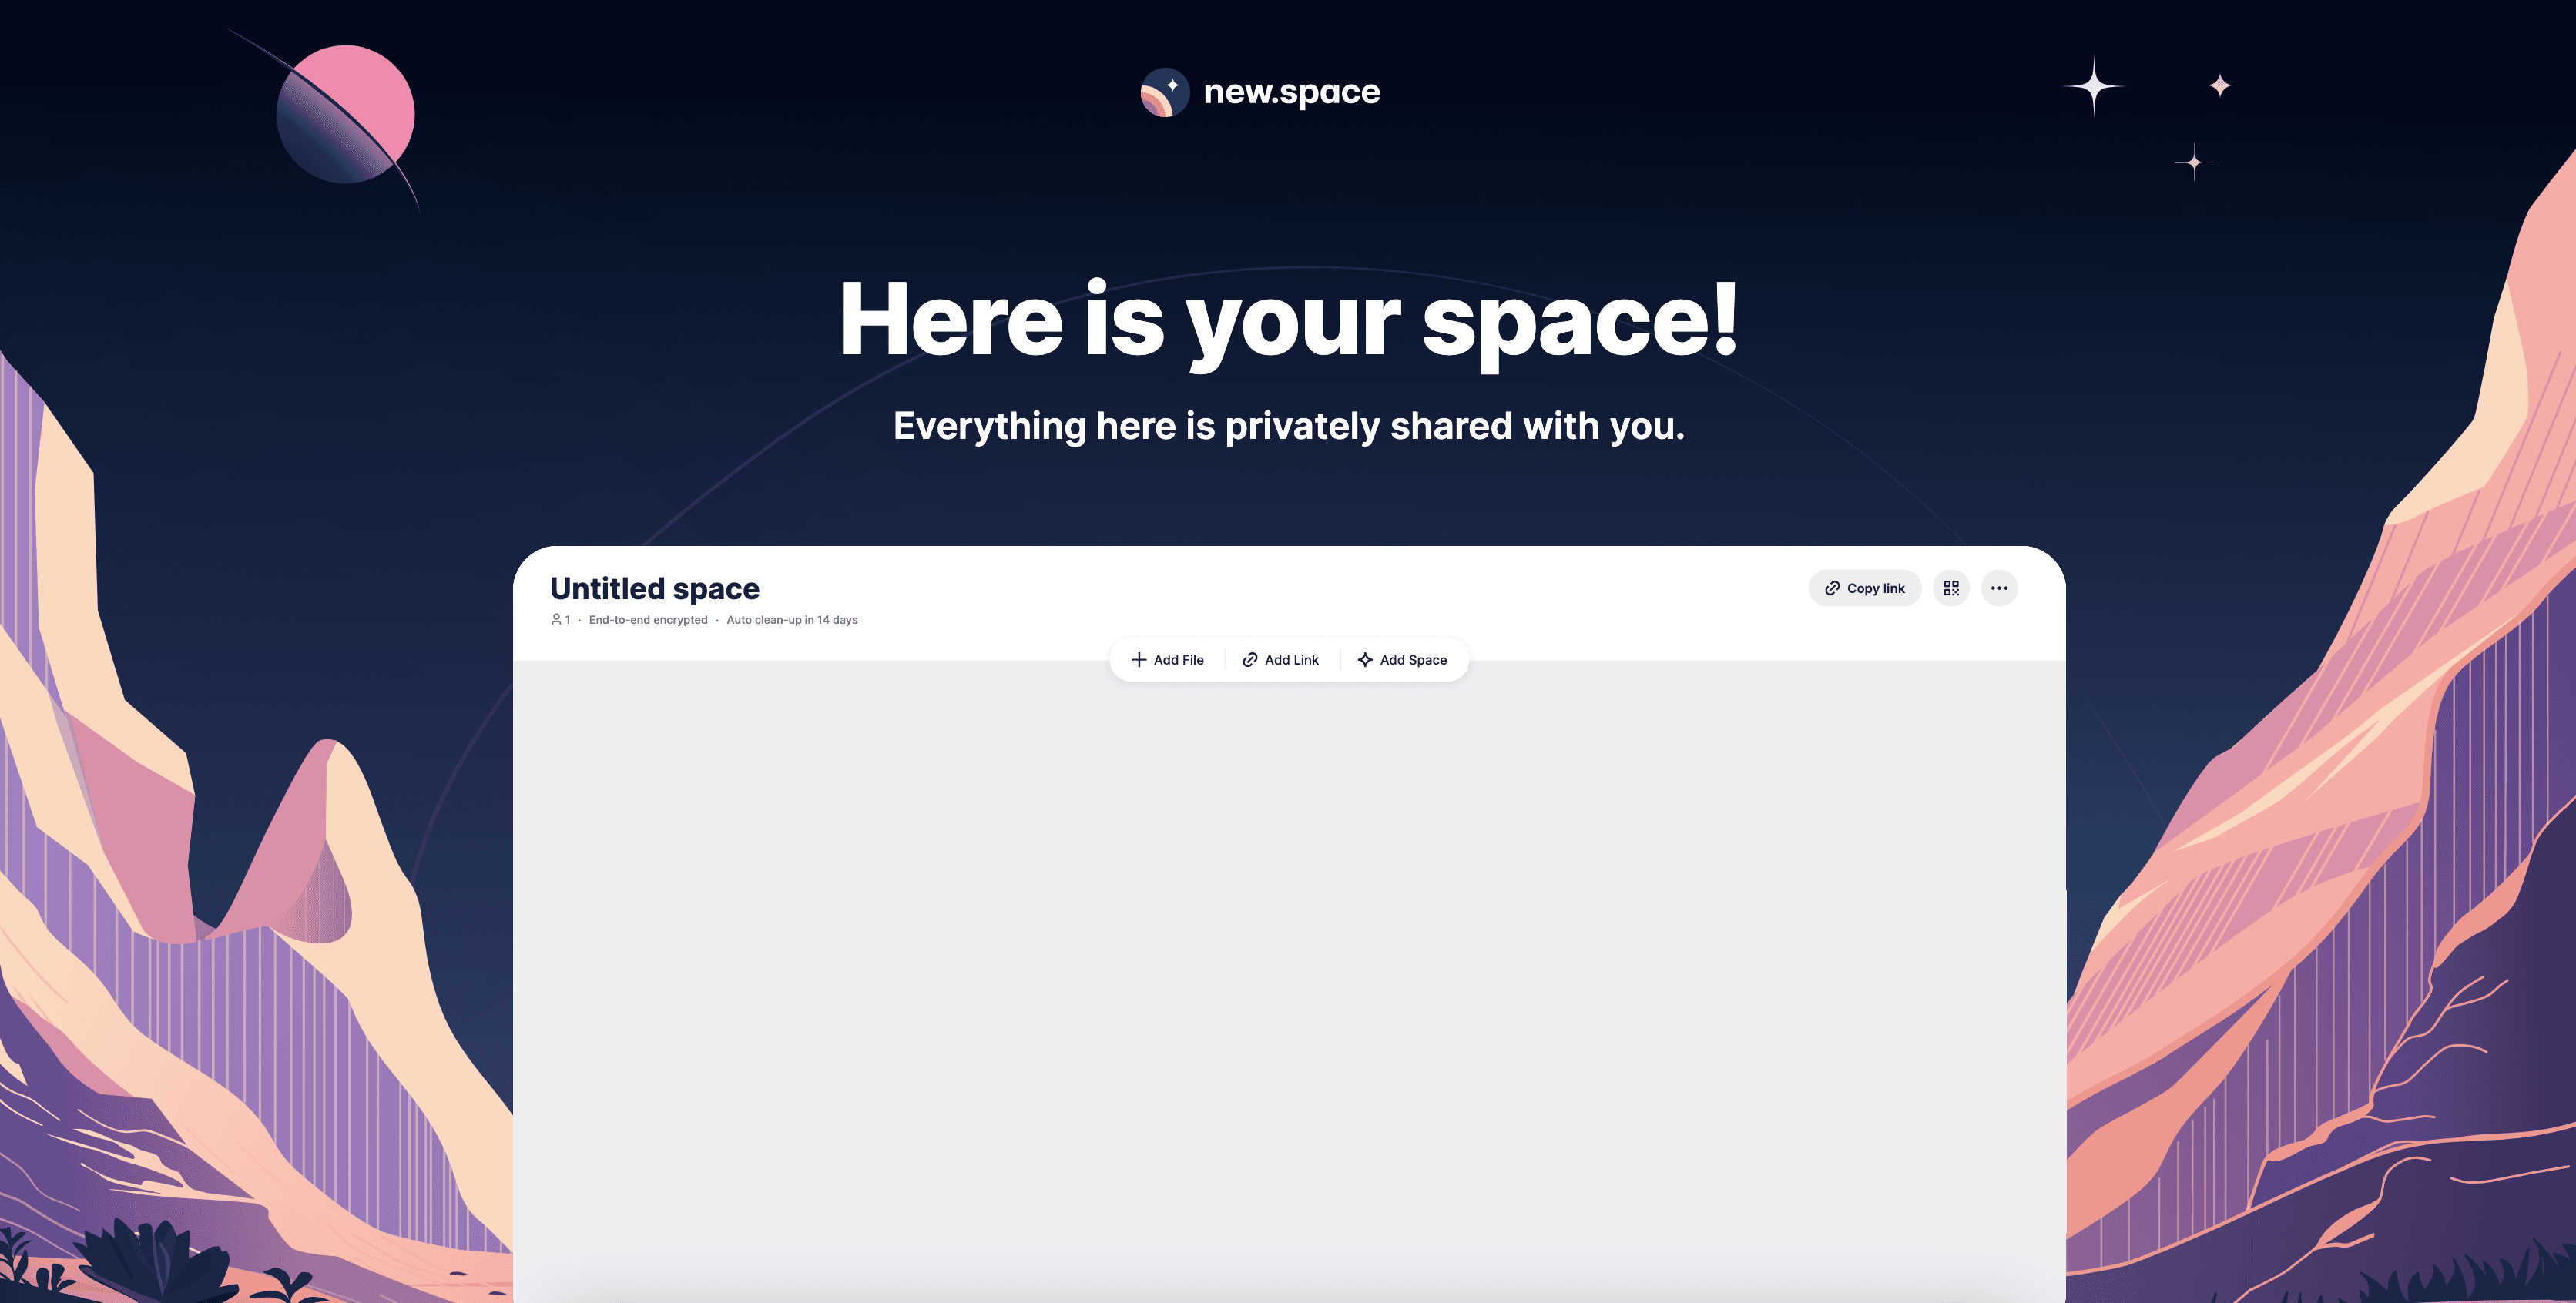 An image the new.space landing page